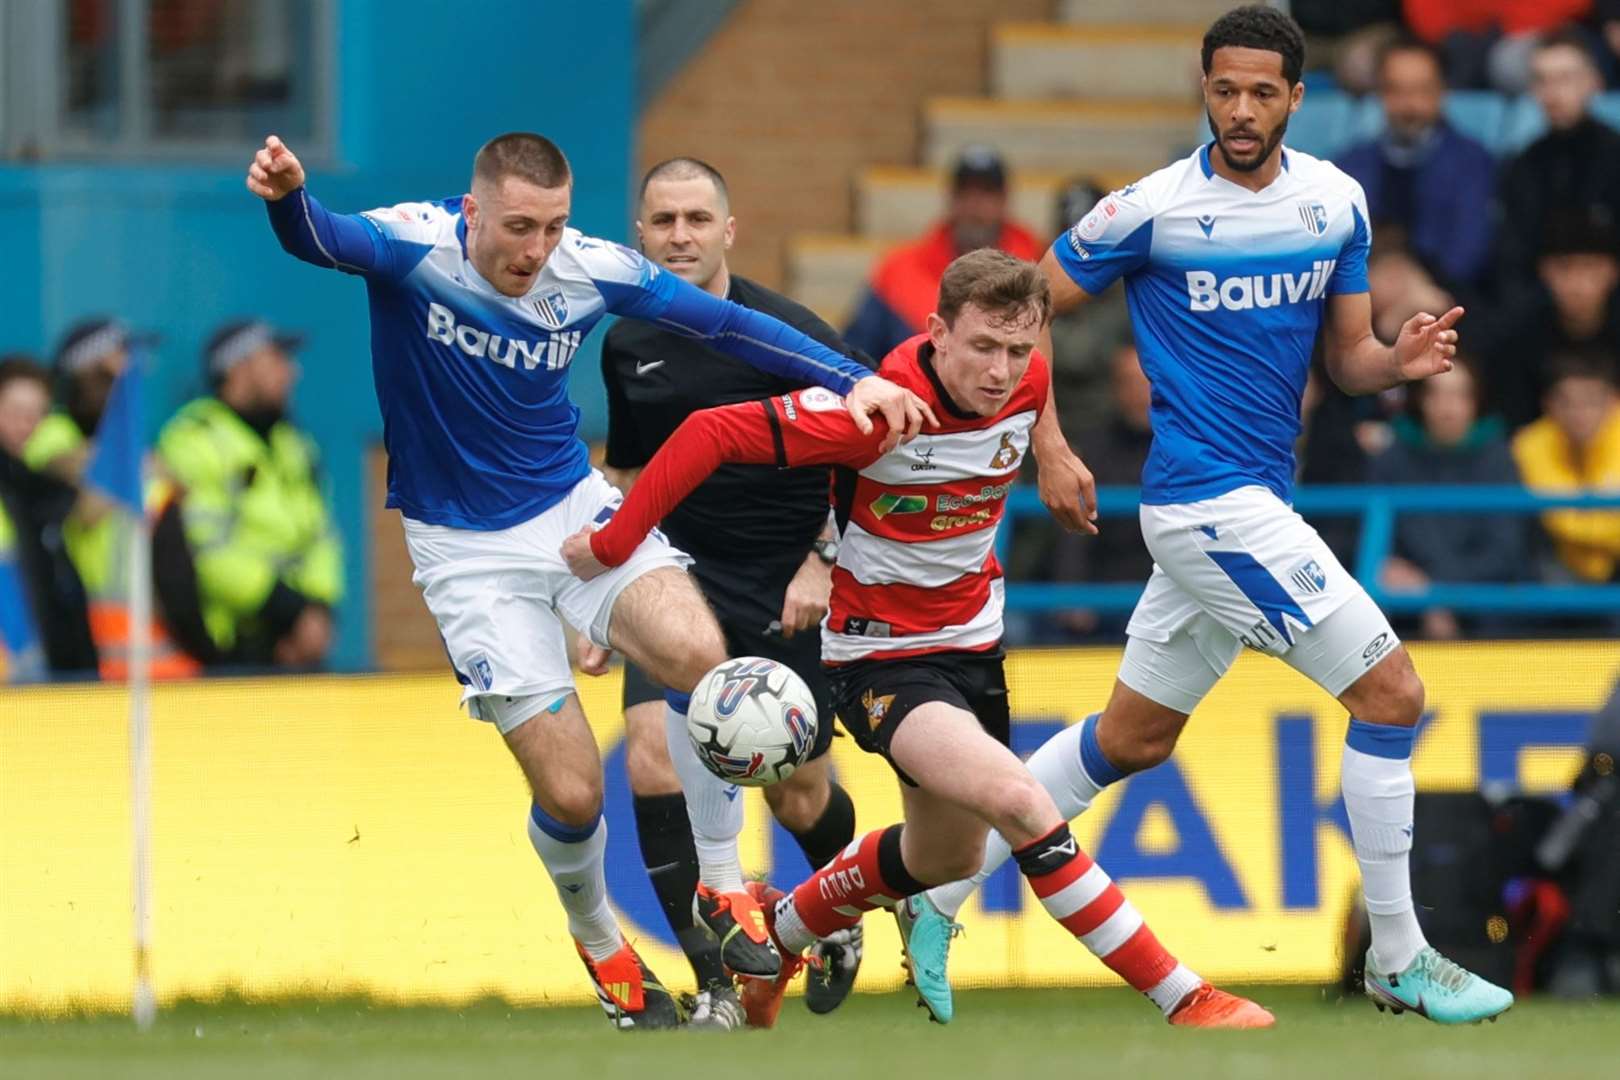 Dom Jefferies challenges for the ball in the first half at Priestfield Picture: @Julian_KPI